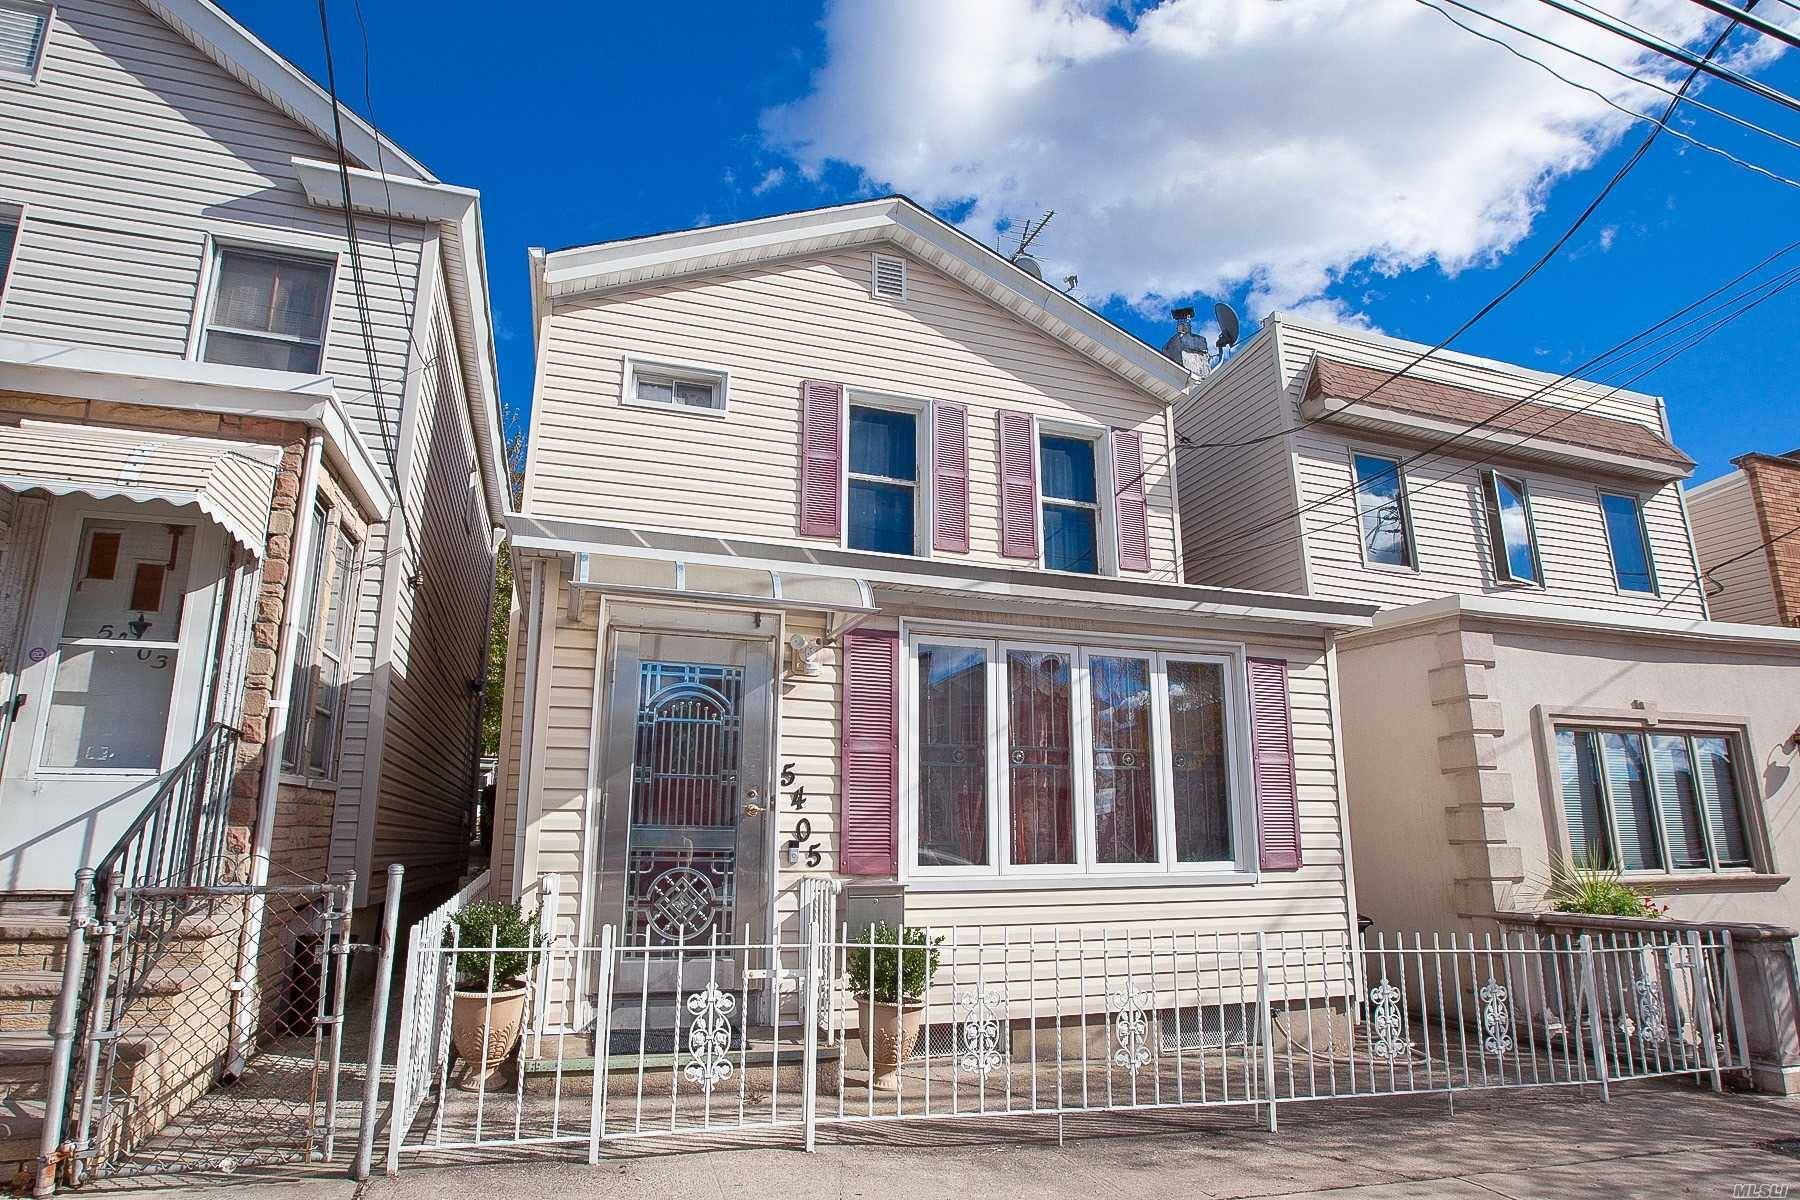 Beautifully Well Maintained Detach R4 Zoned Property In The Heart Of Maspeth.